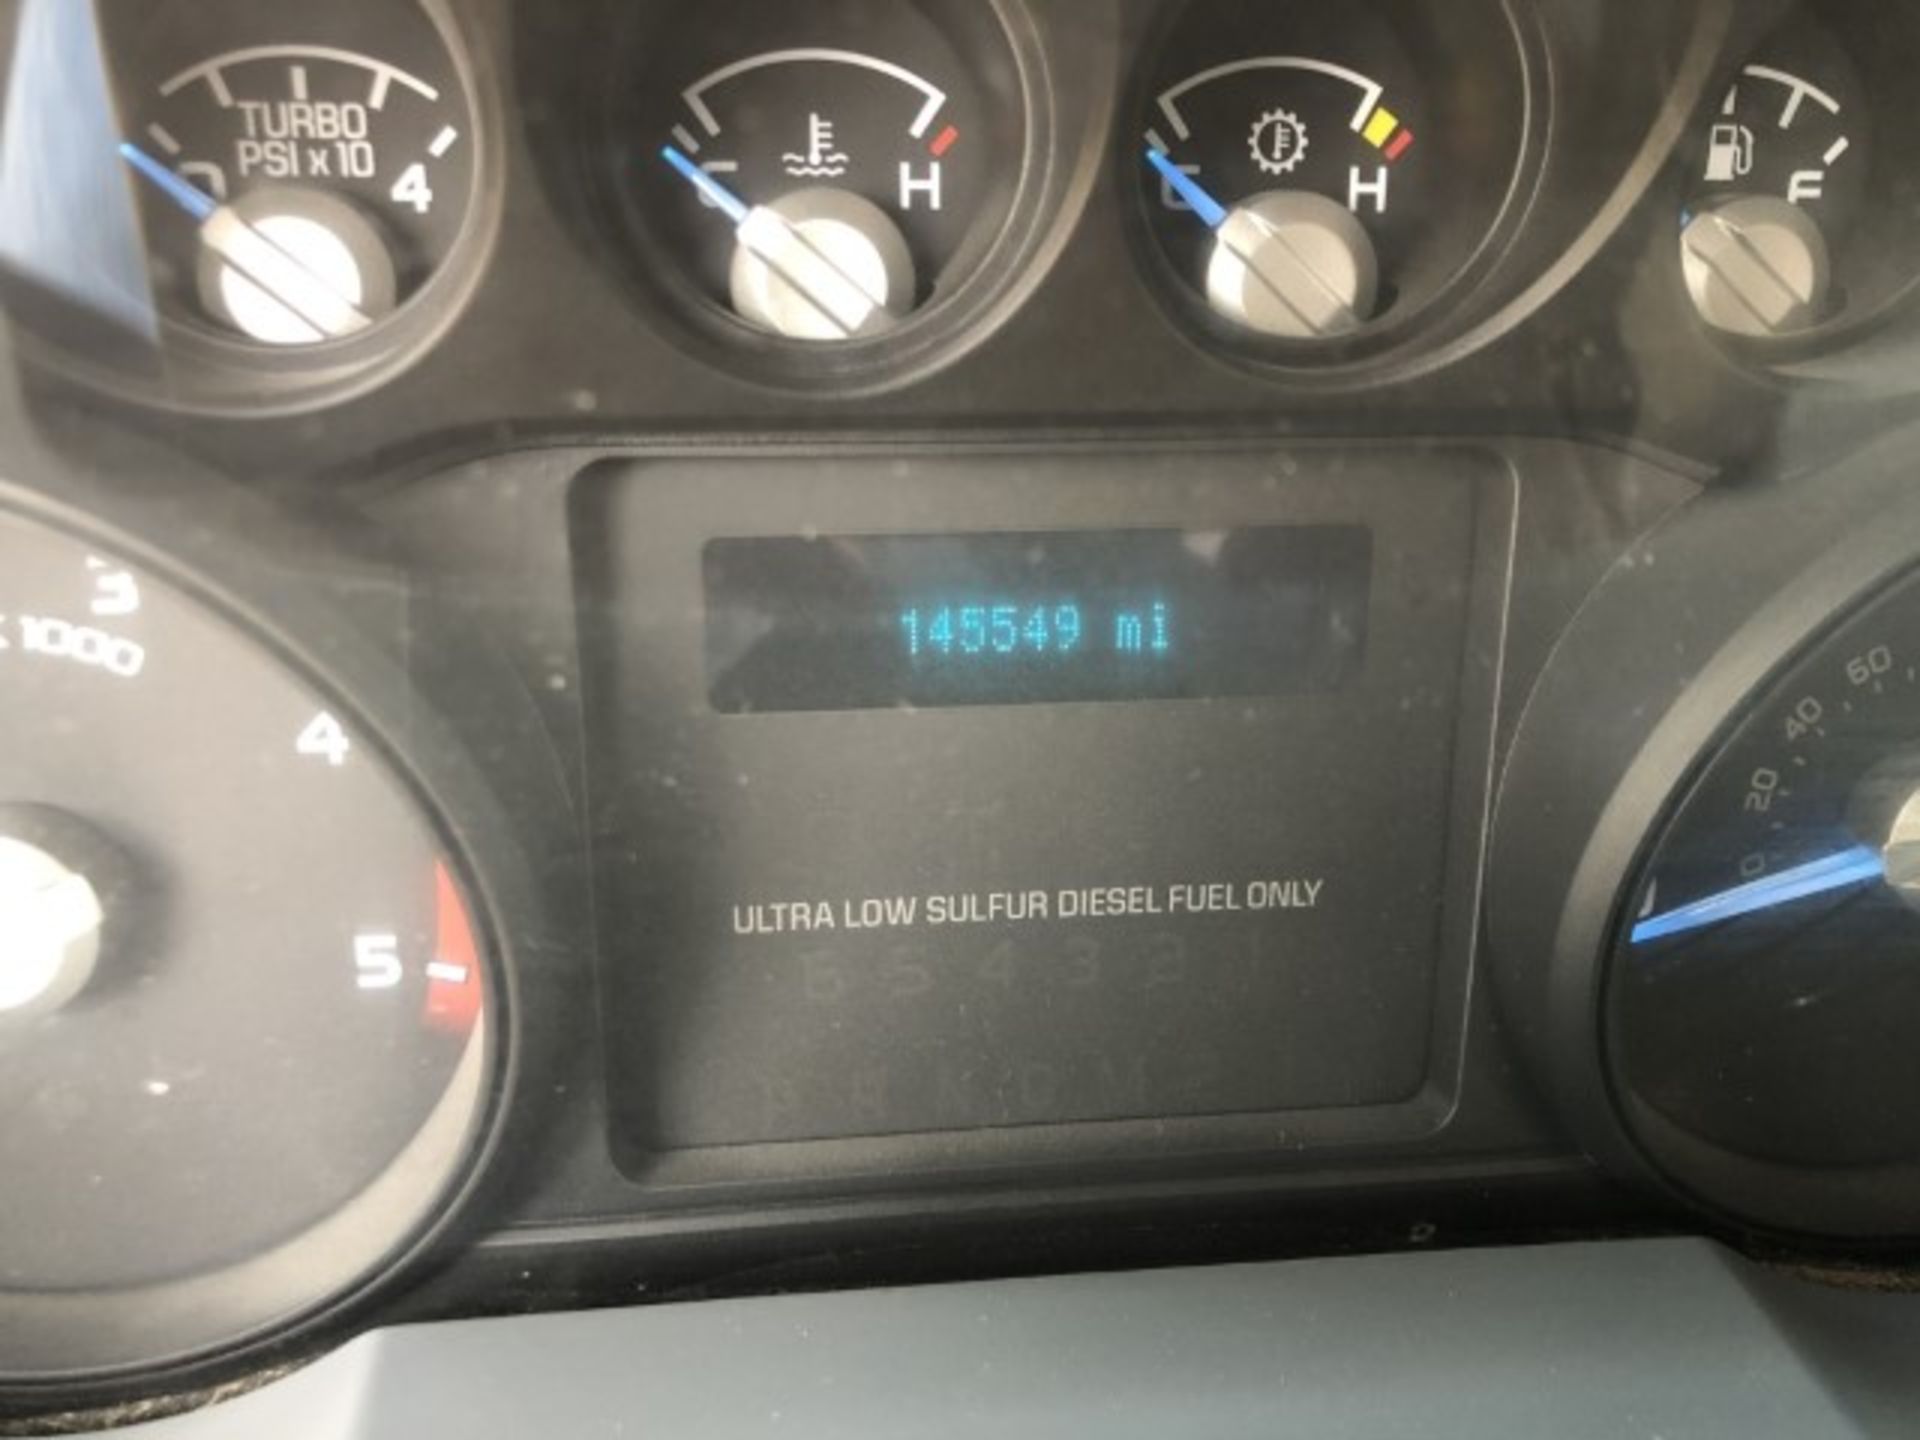 2015 Ford F-450 Service Truck VIN: 1FD0W4HT7FED32562 Odometer States: 14554 - Image 5 of 6